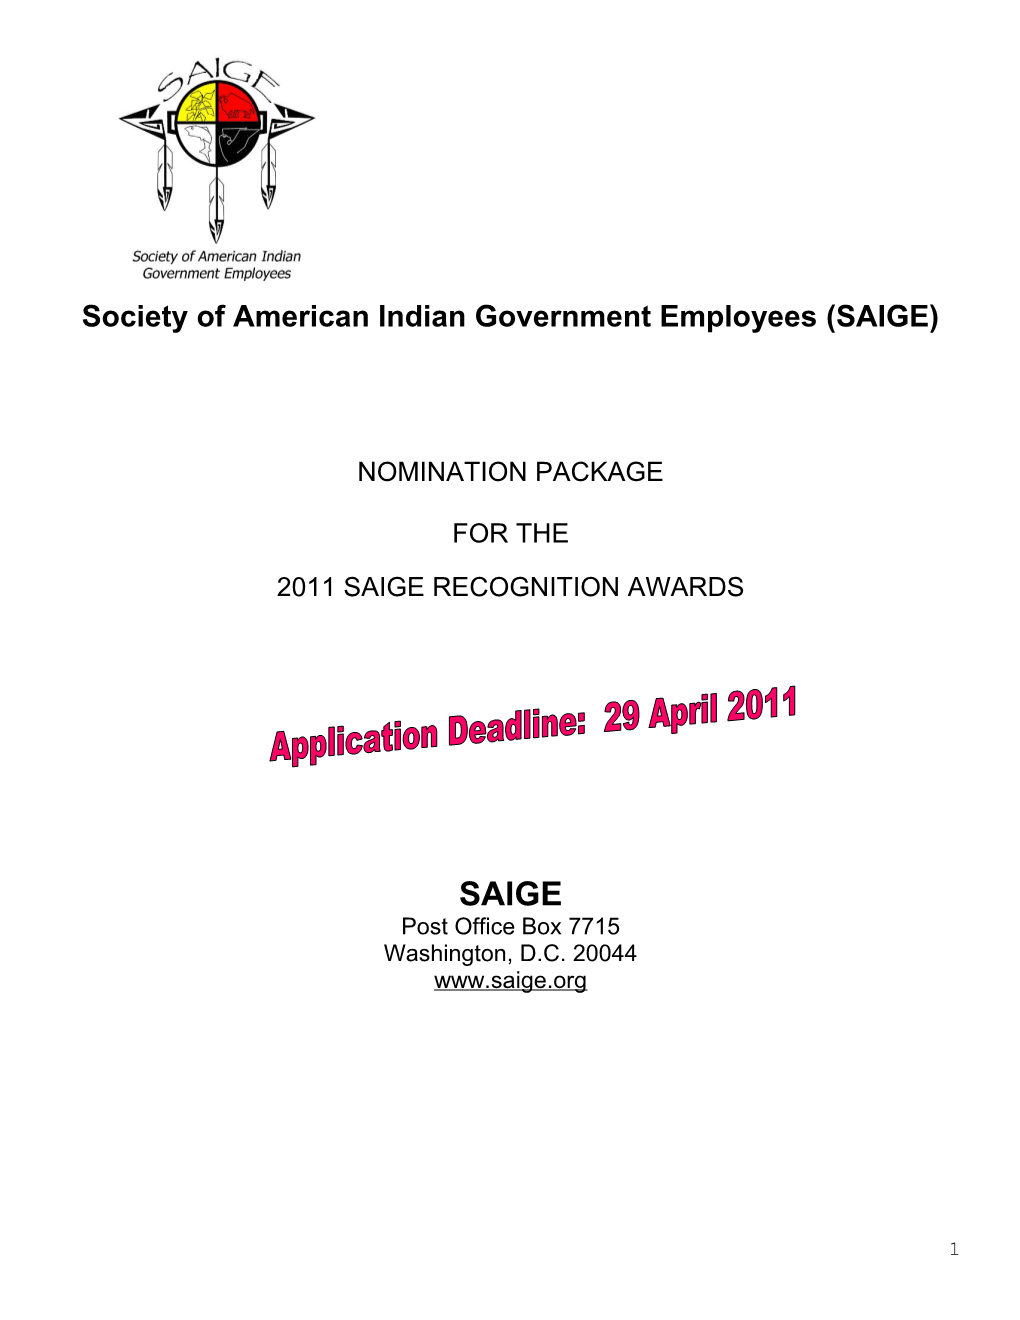 Society of American Indian Government Employees (Saige)